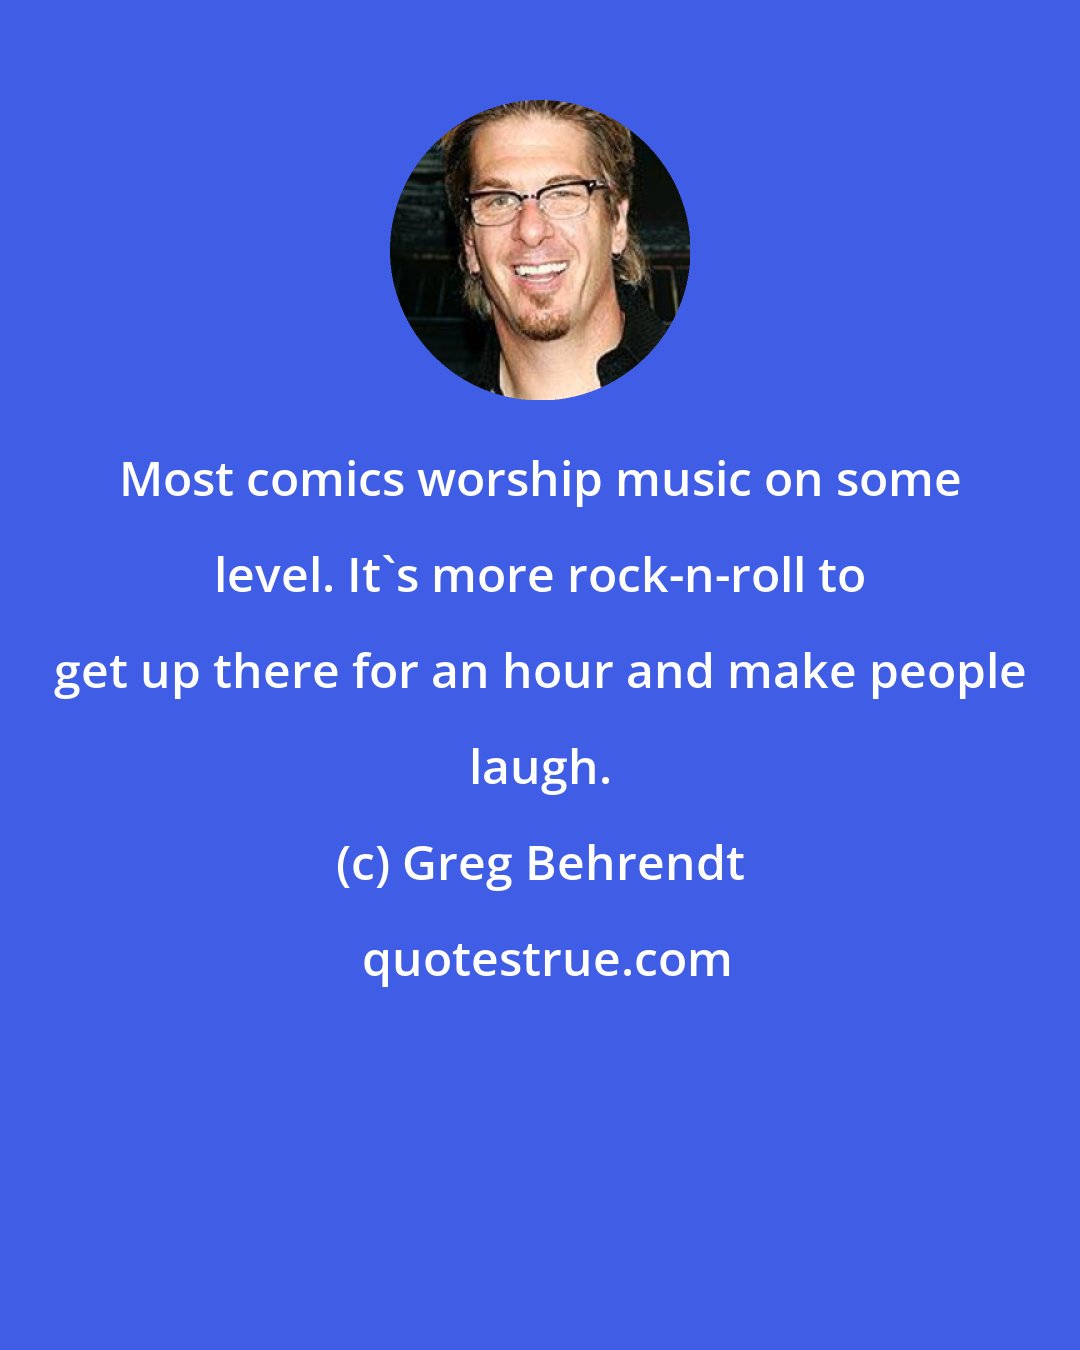 Greg Behrendt: Most comics worship music on some level. It's more rock-n-roll to get up there for an hour and make people laugh.